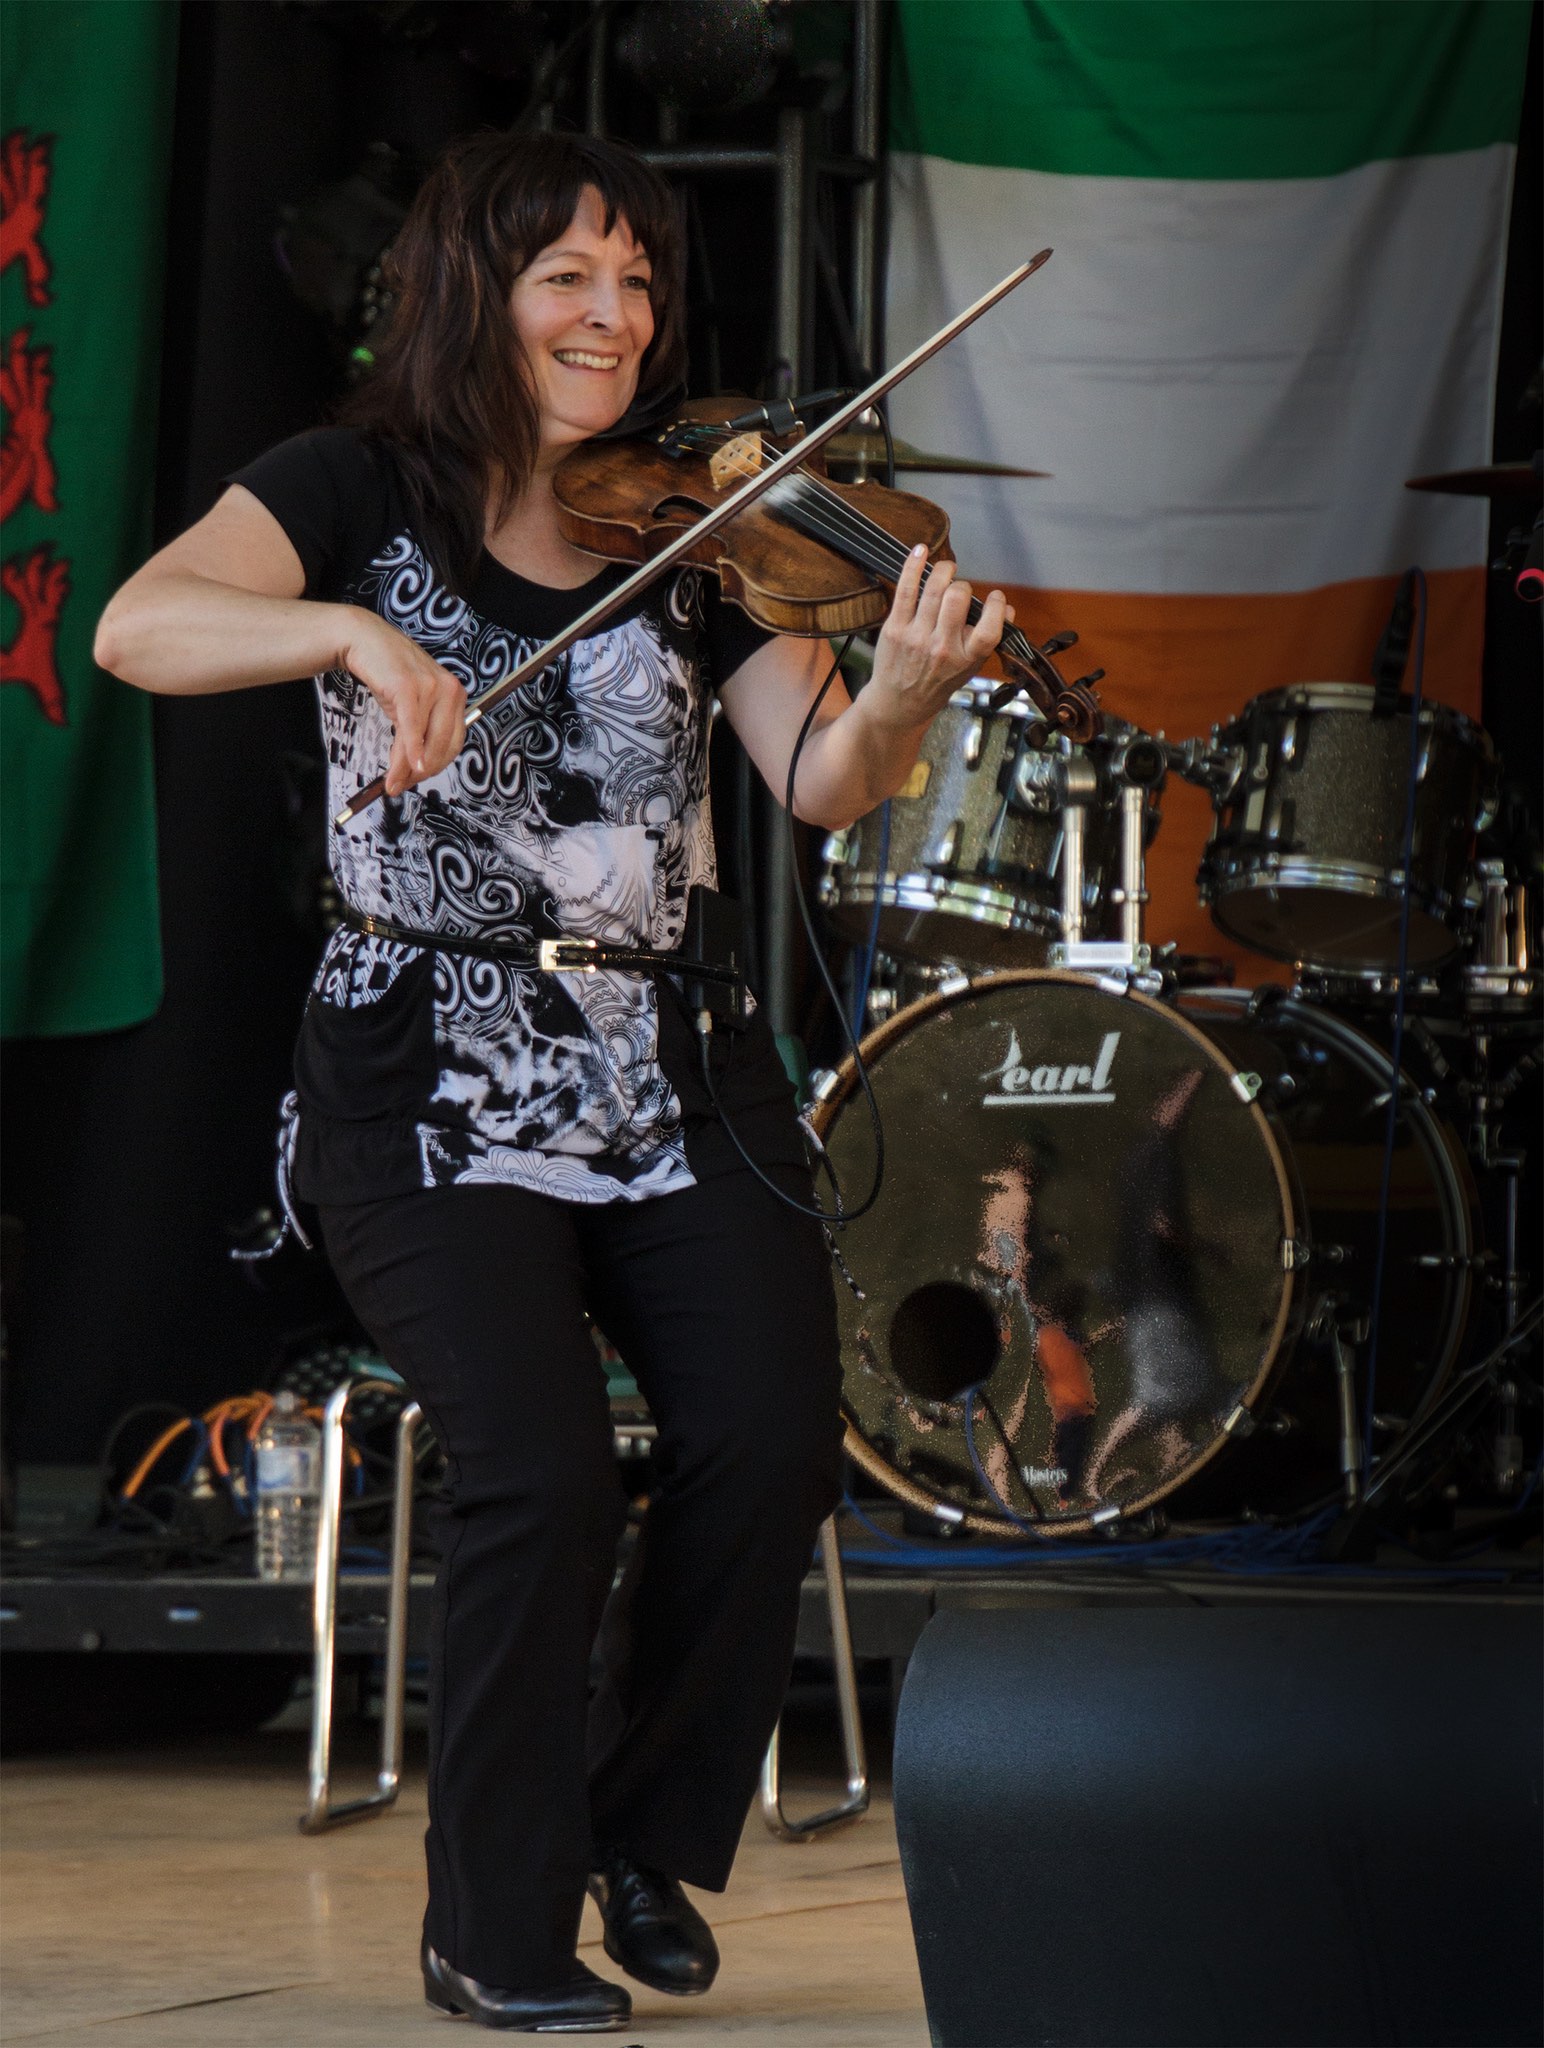 Cindy Thompson similing, step dancing and playing the fiddle on stage in front of a set of drums.